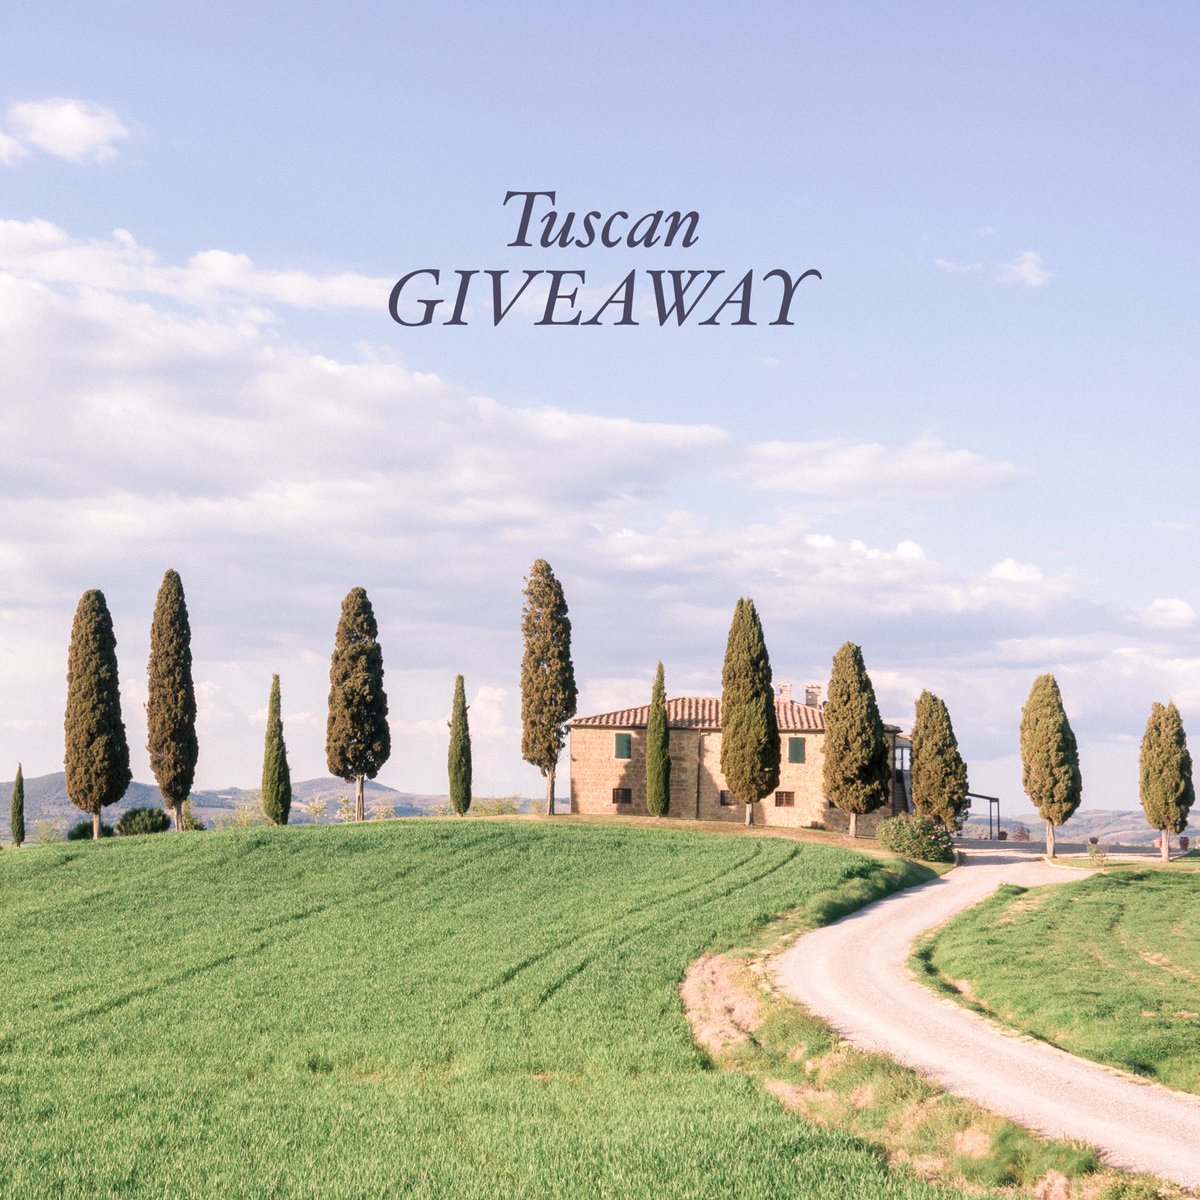 Planning a #vacation or struck by #wanderlust? Enter our #giveaway on Instagram! Pamelabarefoot_events. #tuscany #italy #dcweddingplanner